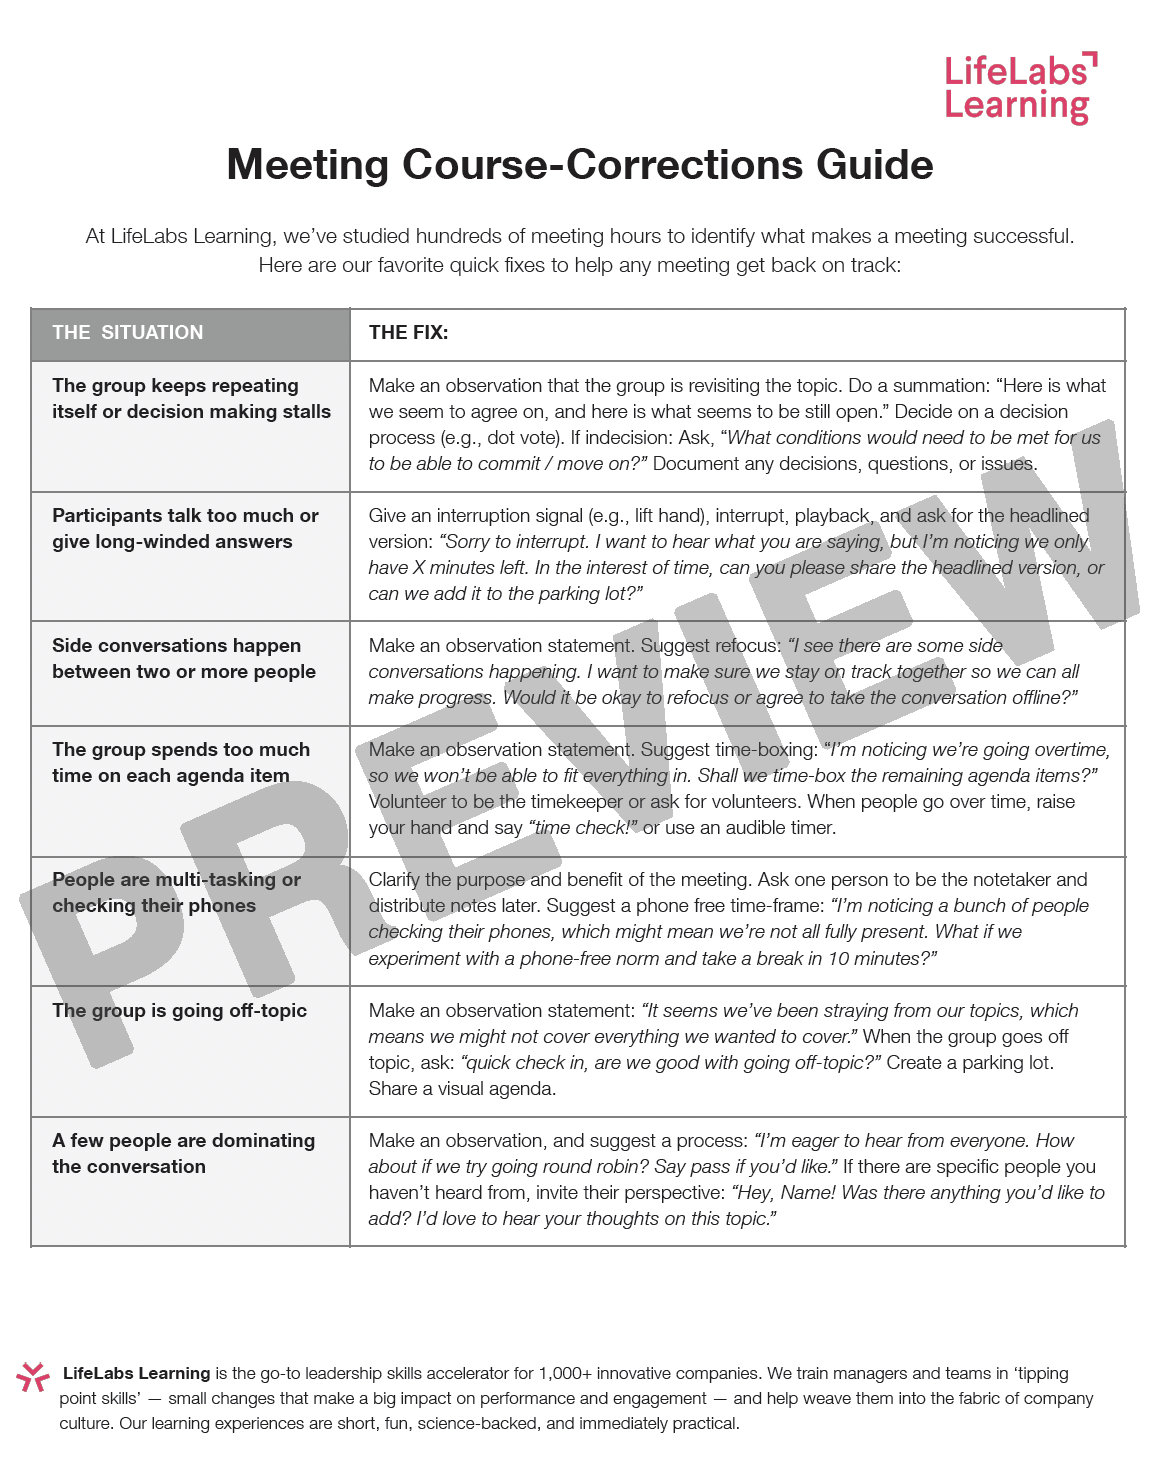 Meeting Course-Corrections Guide